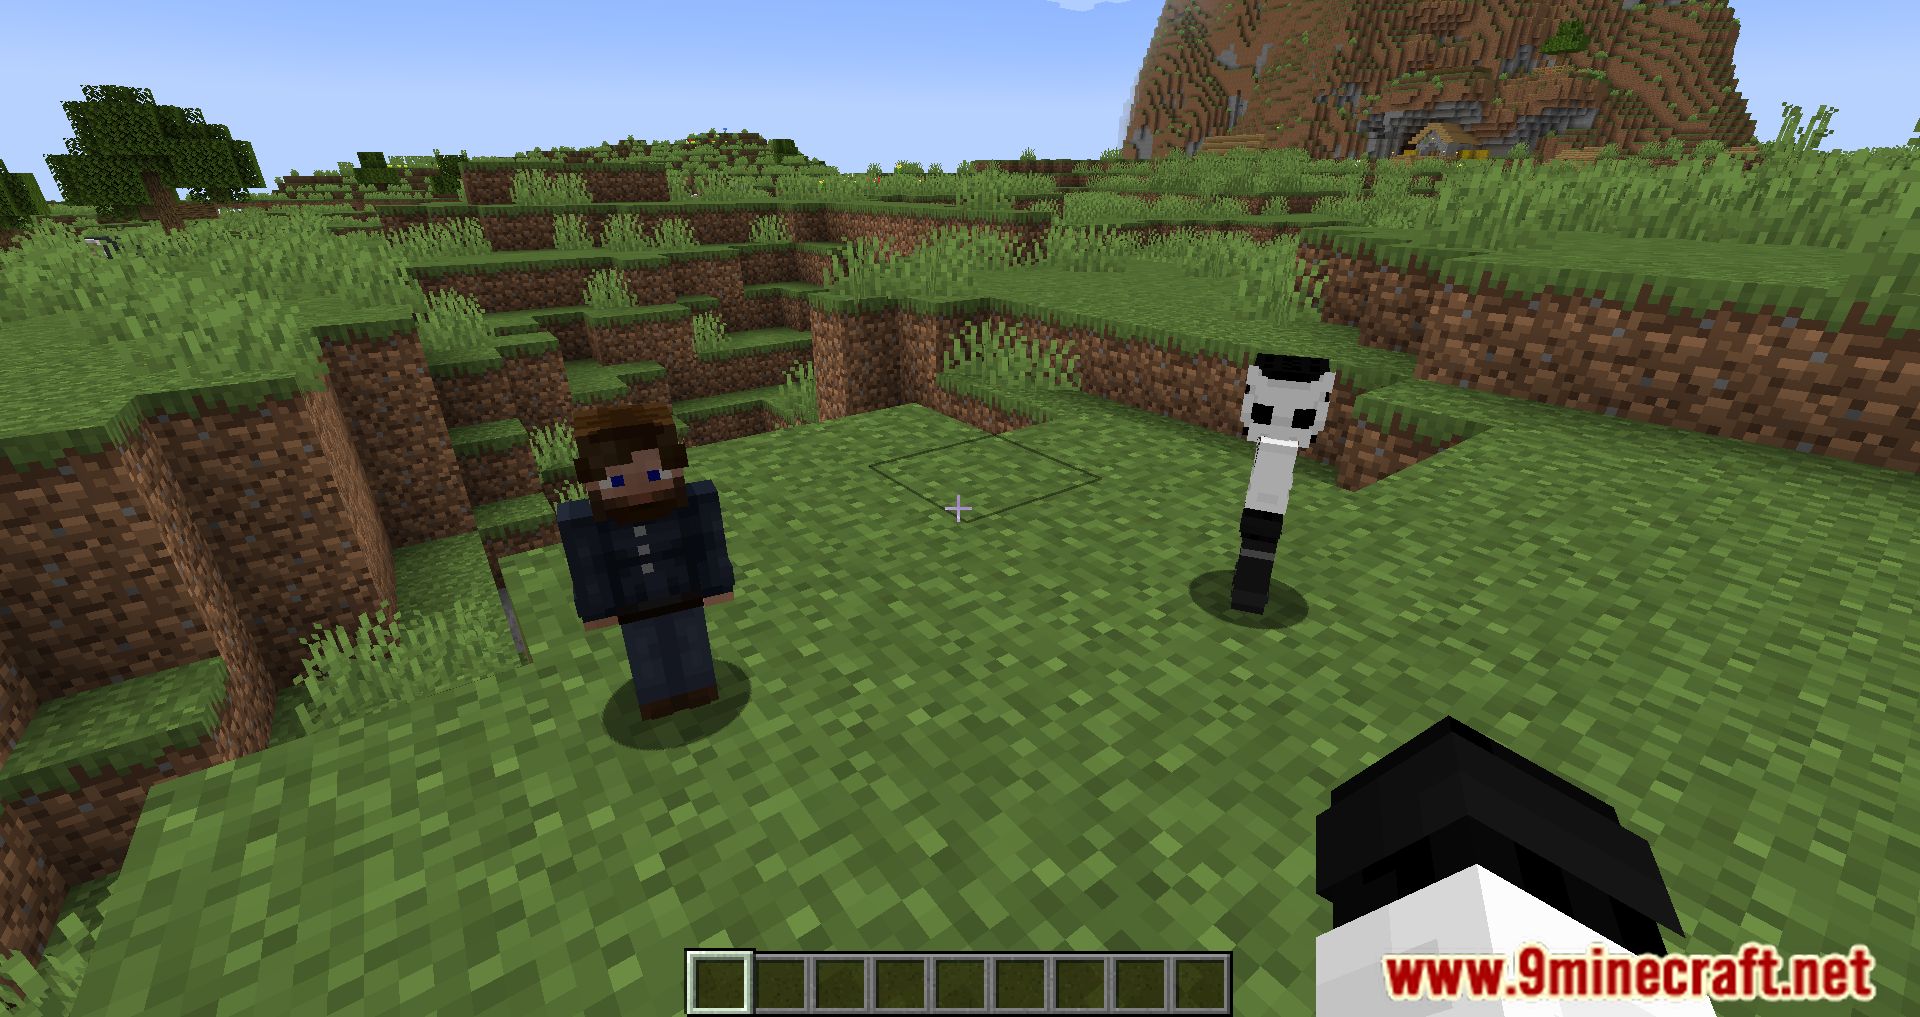 GitHub - msifd/mpm-ariadna: Mod of Noppes' Minecraft mod More Player Models